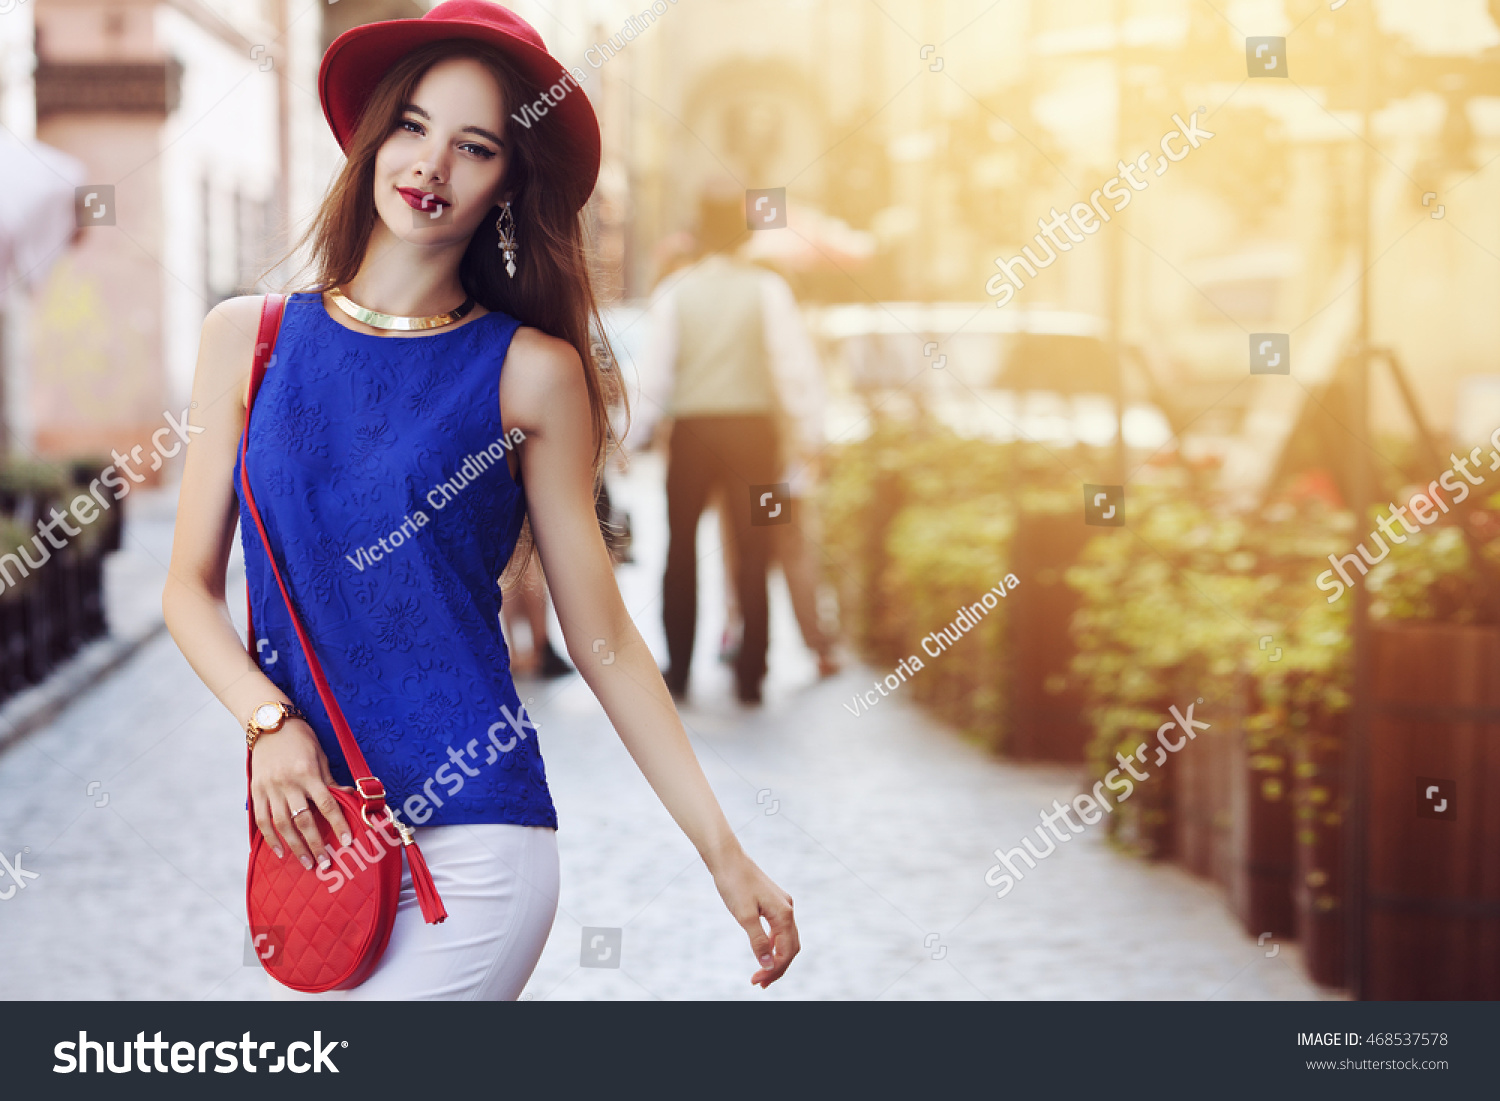 Outdoor portrait of young beautiful happy smiling woman posing on street. Model wearing stylish hat and clothes. Girl looking at camera. Female fashion. Sunny day. City lifestyle. Copy space for text #468537578